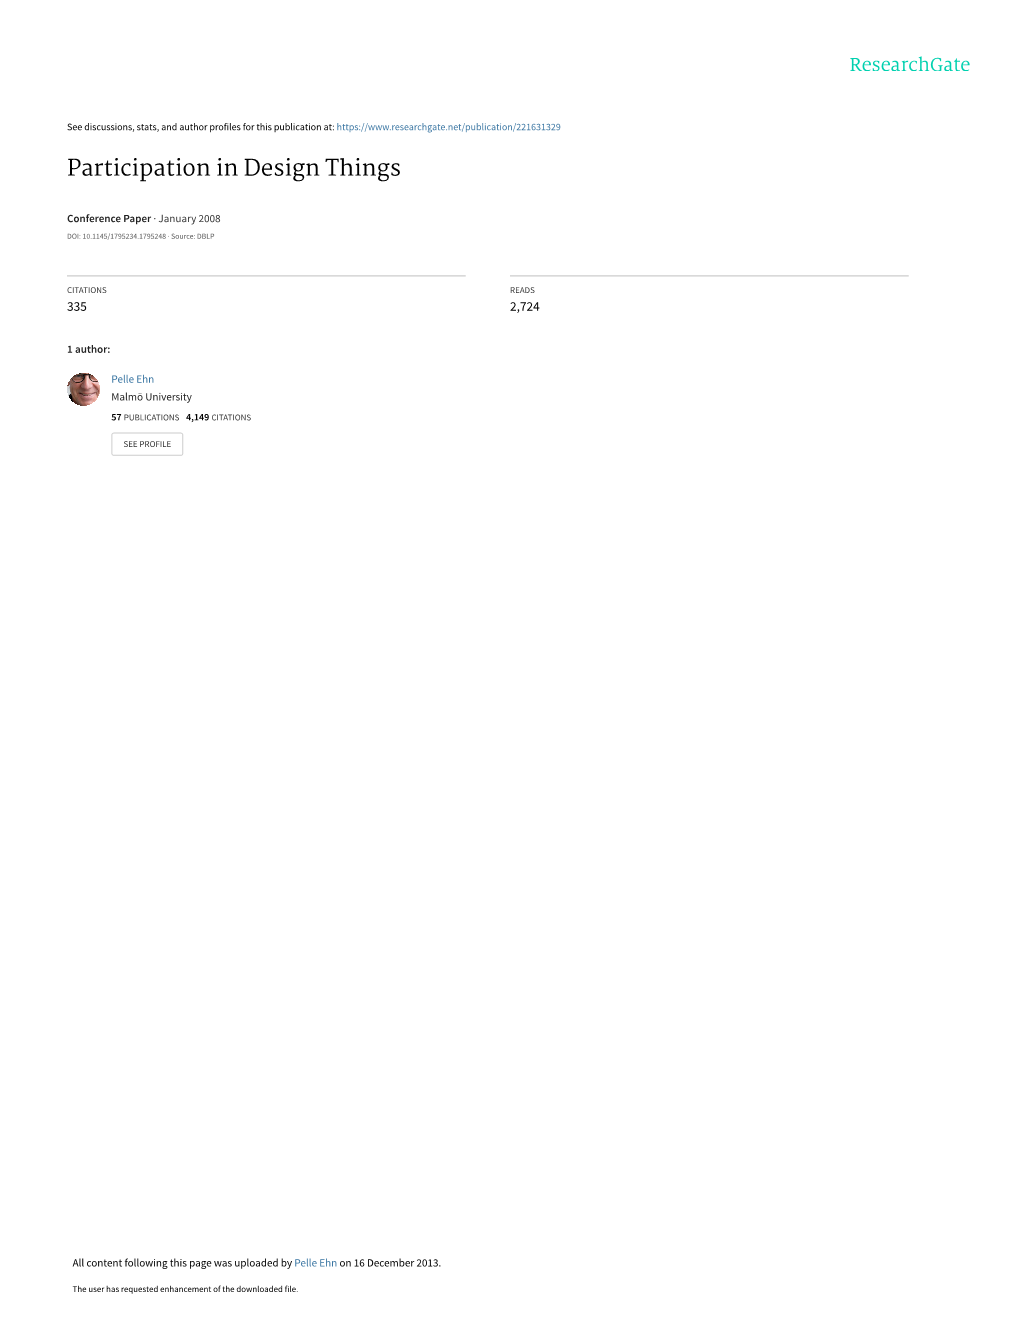 Participation in Design Things